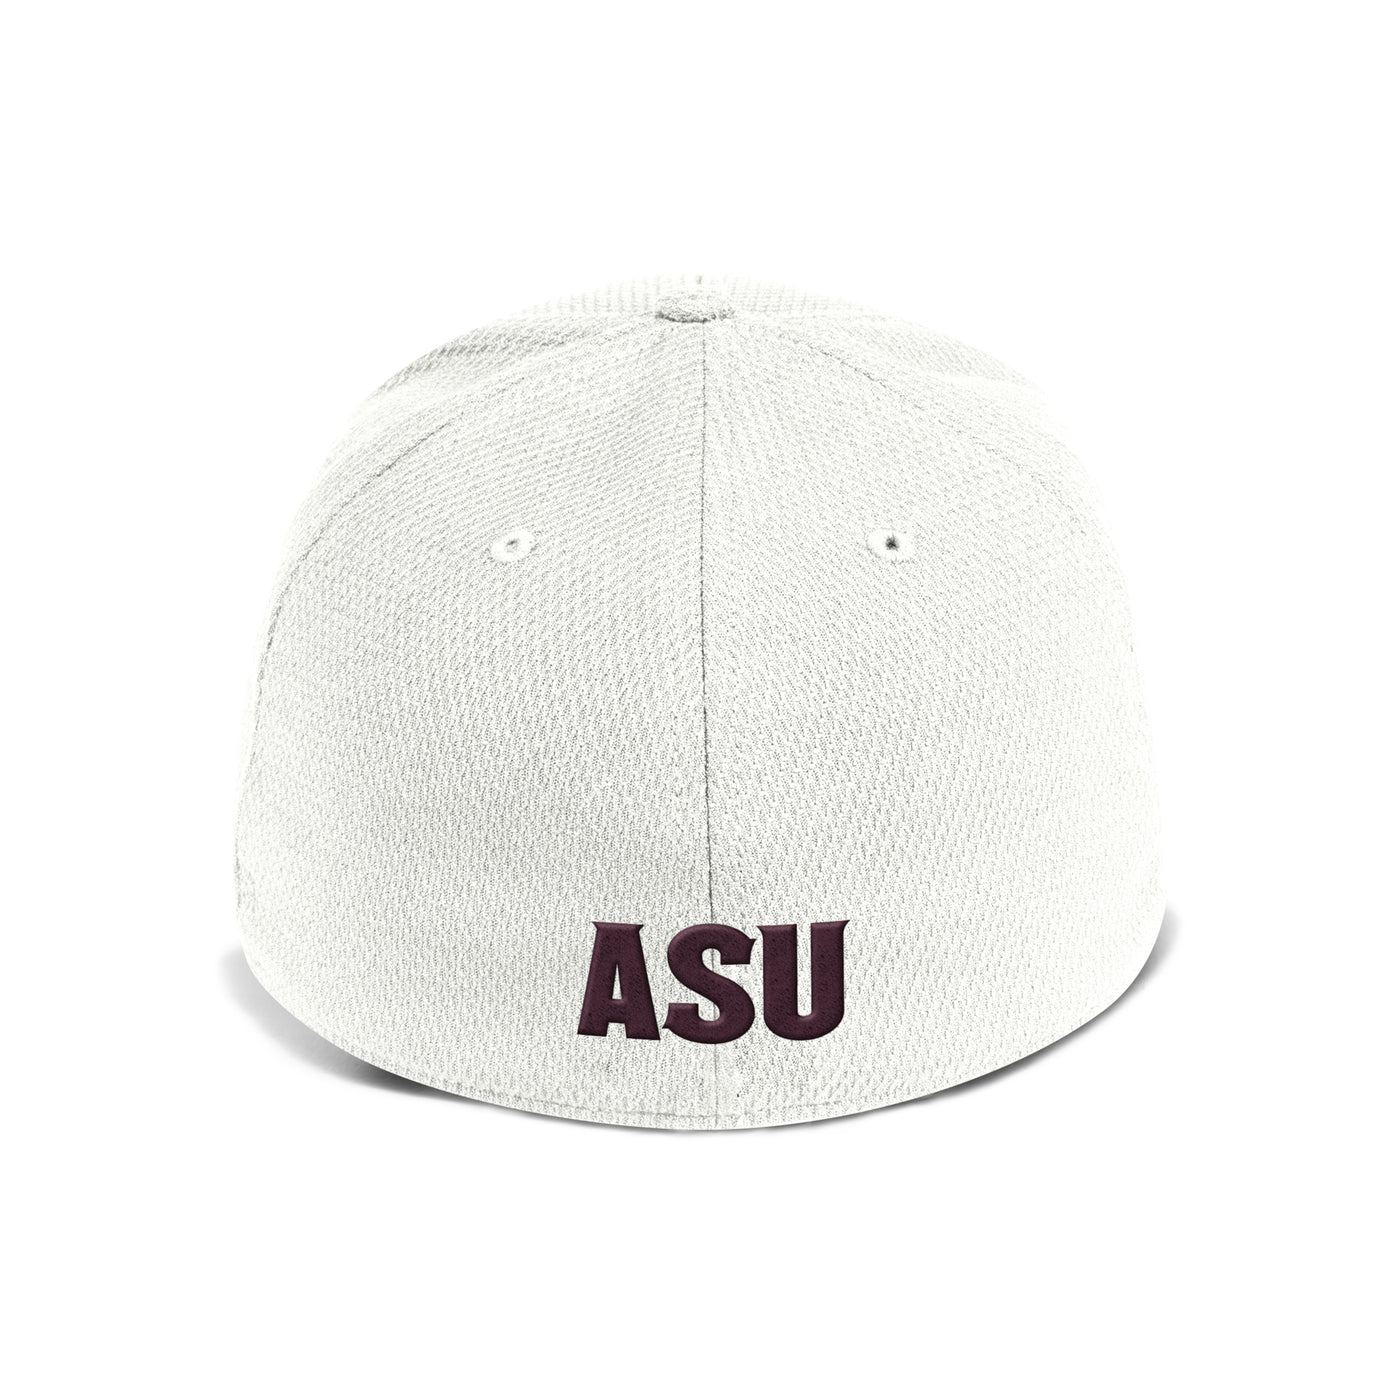 Back of white hat with maroon 